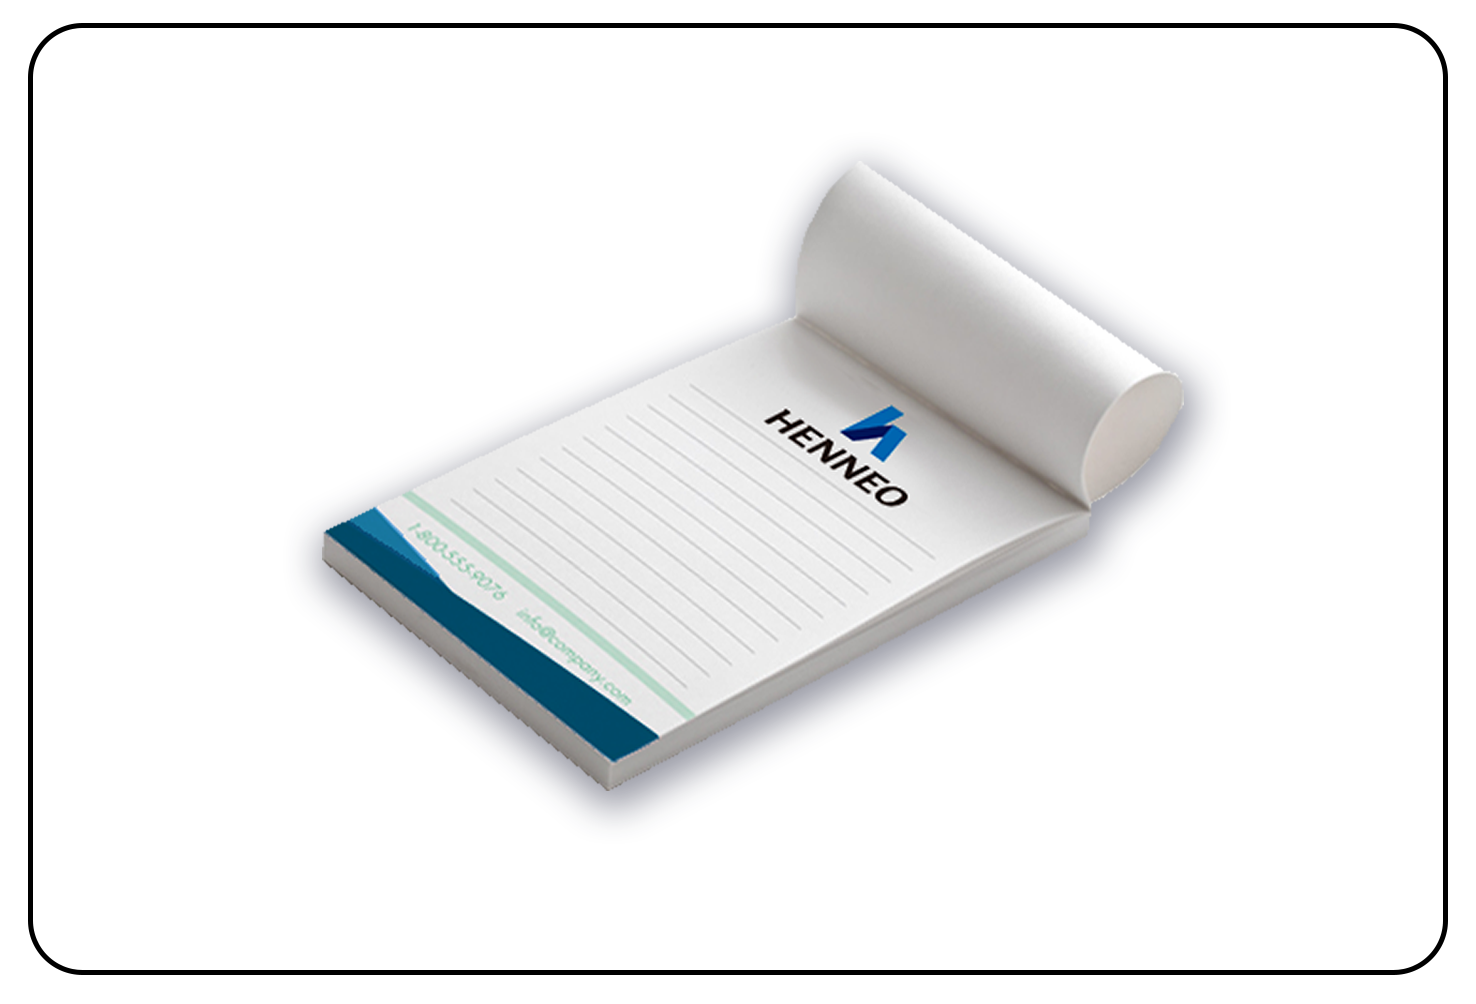 Personalized notepad printing for productive notes.